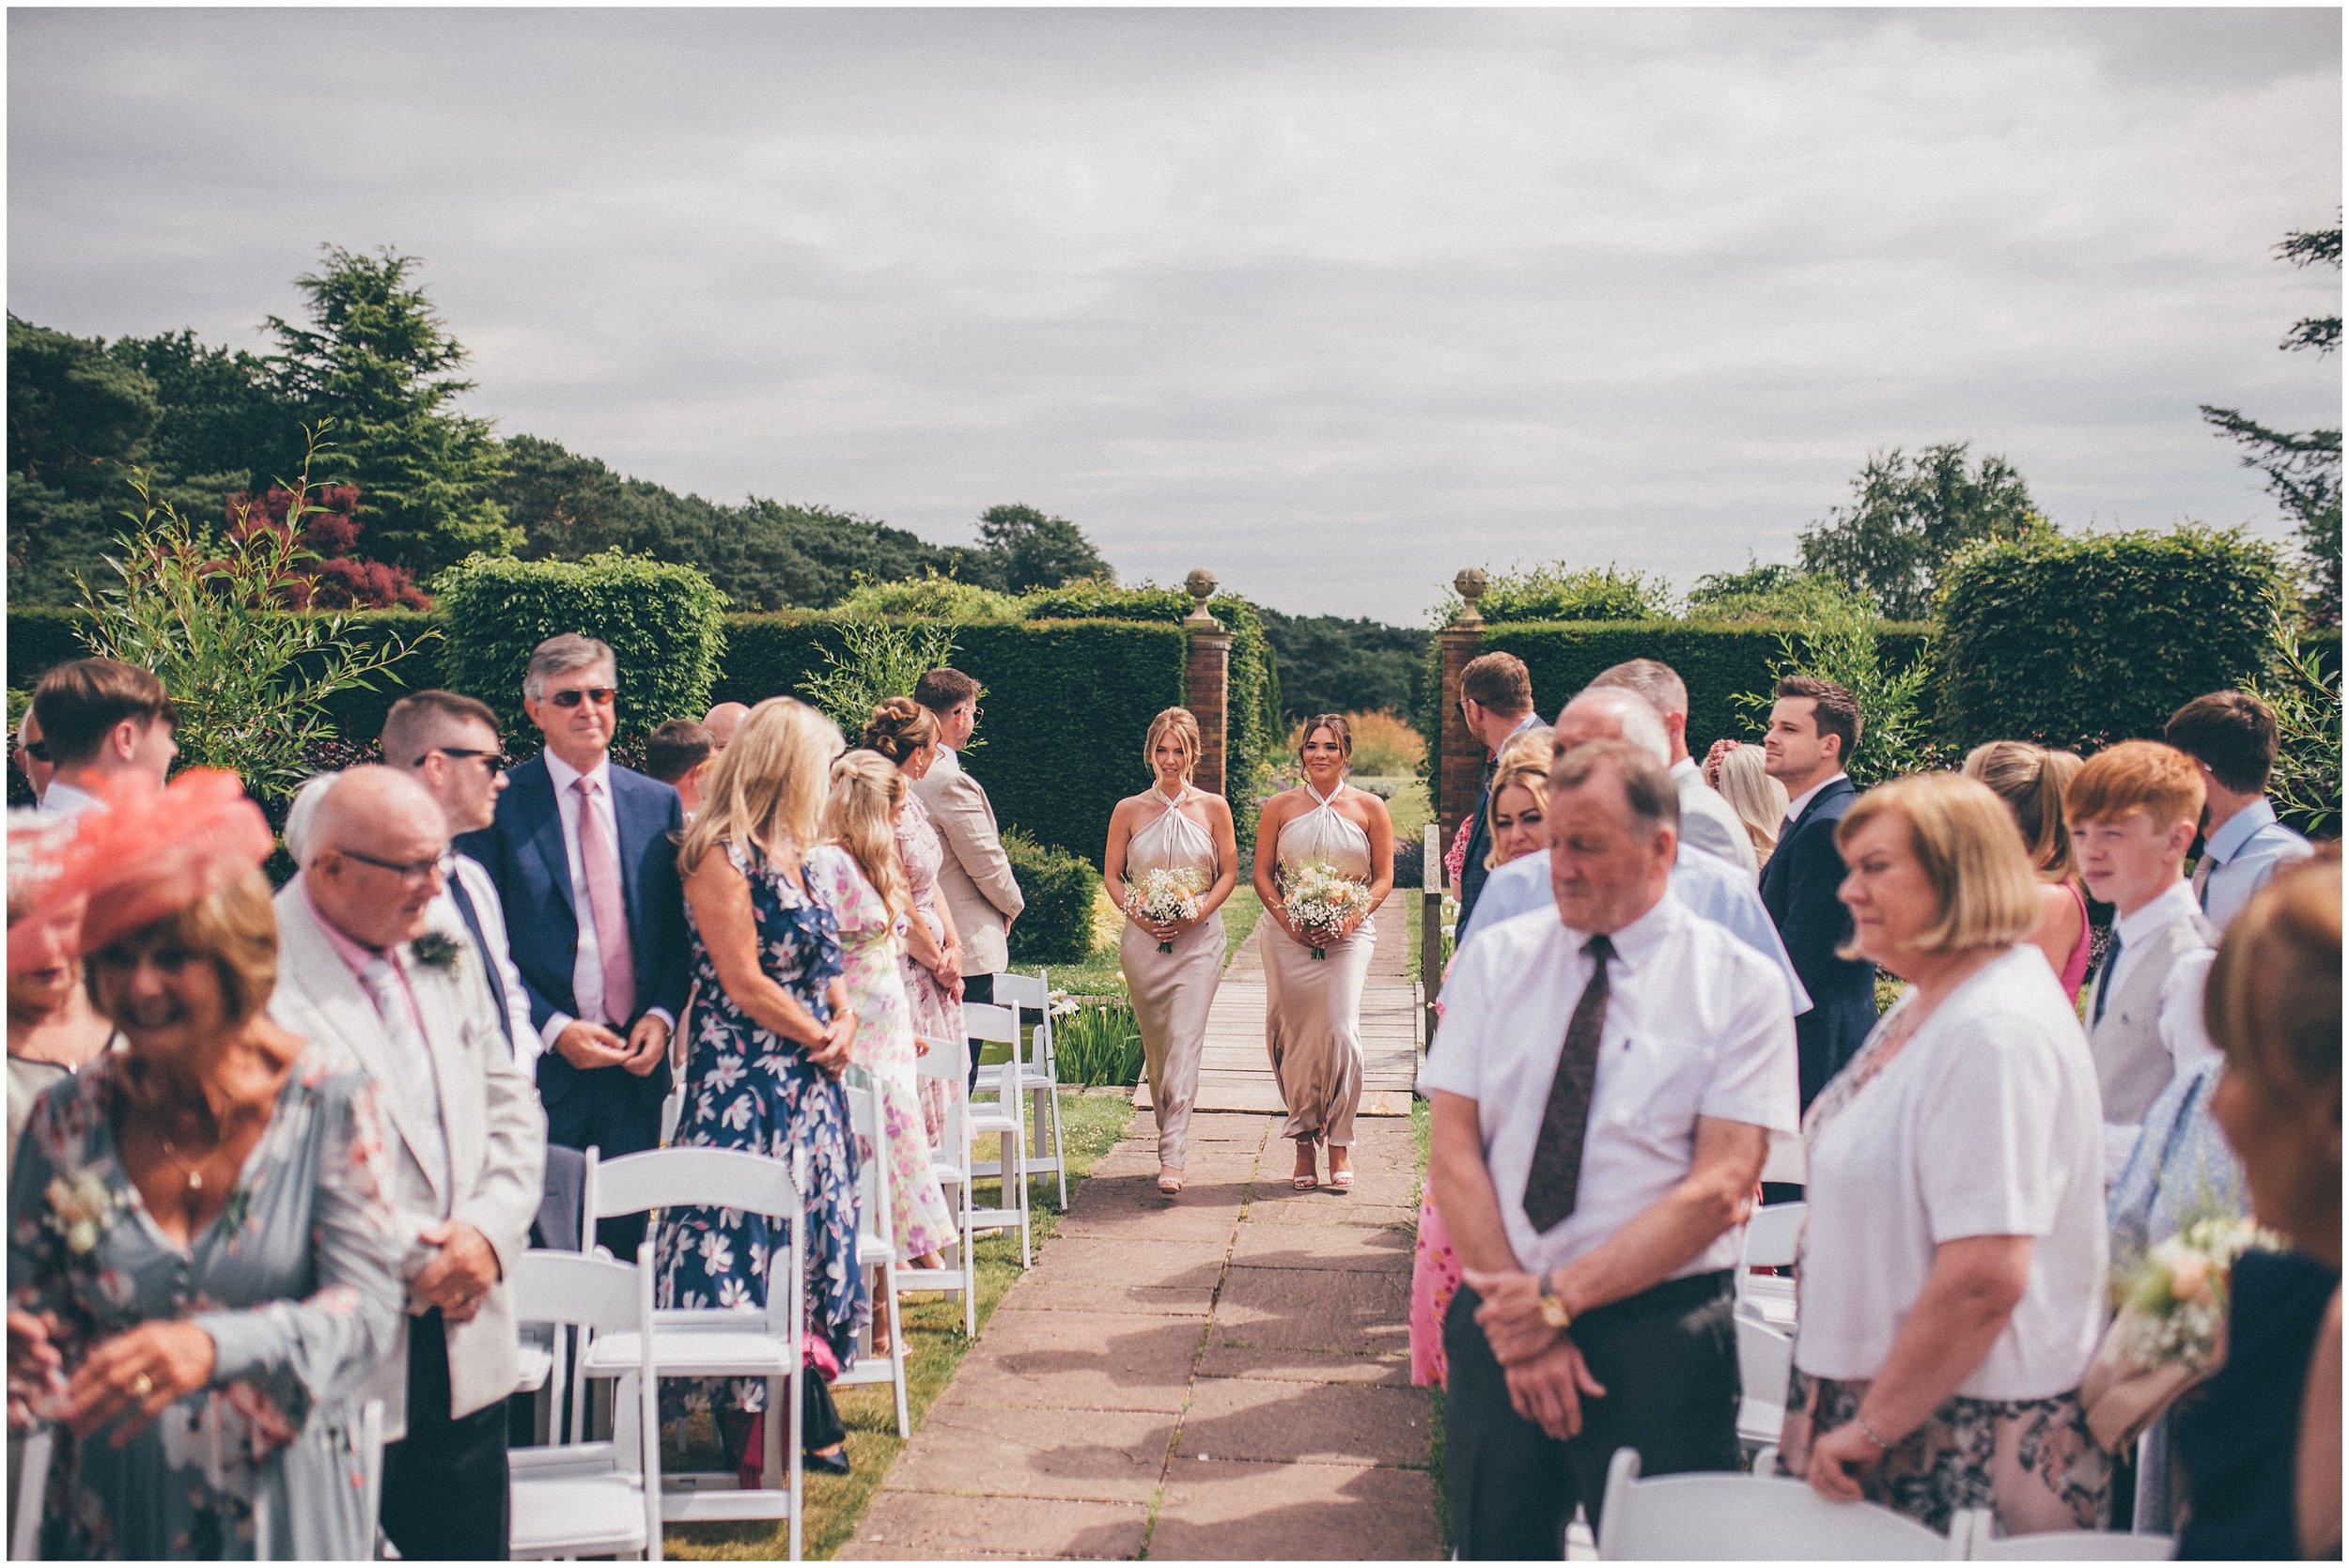 Helen Jane Smiddy North West wedding photographer photographs a Cheshire wedding at Abbeywood Estate in Delamere.